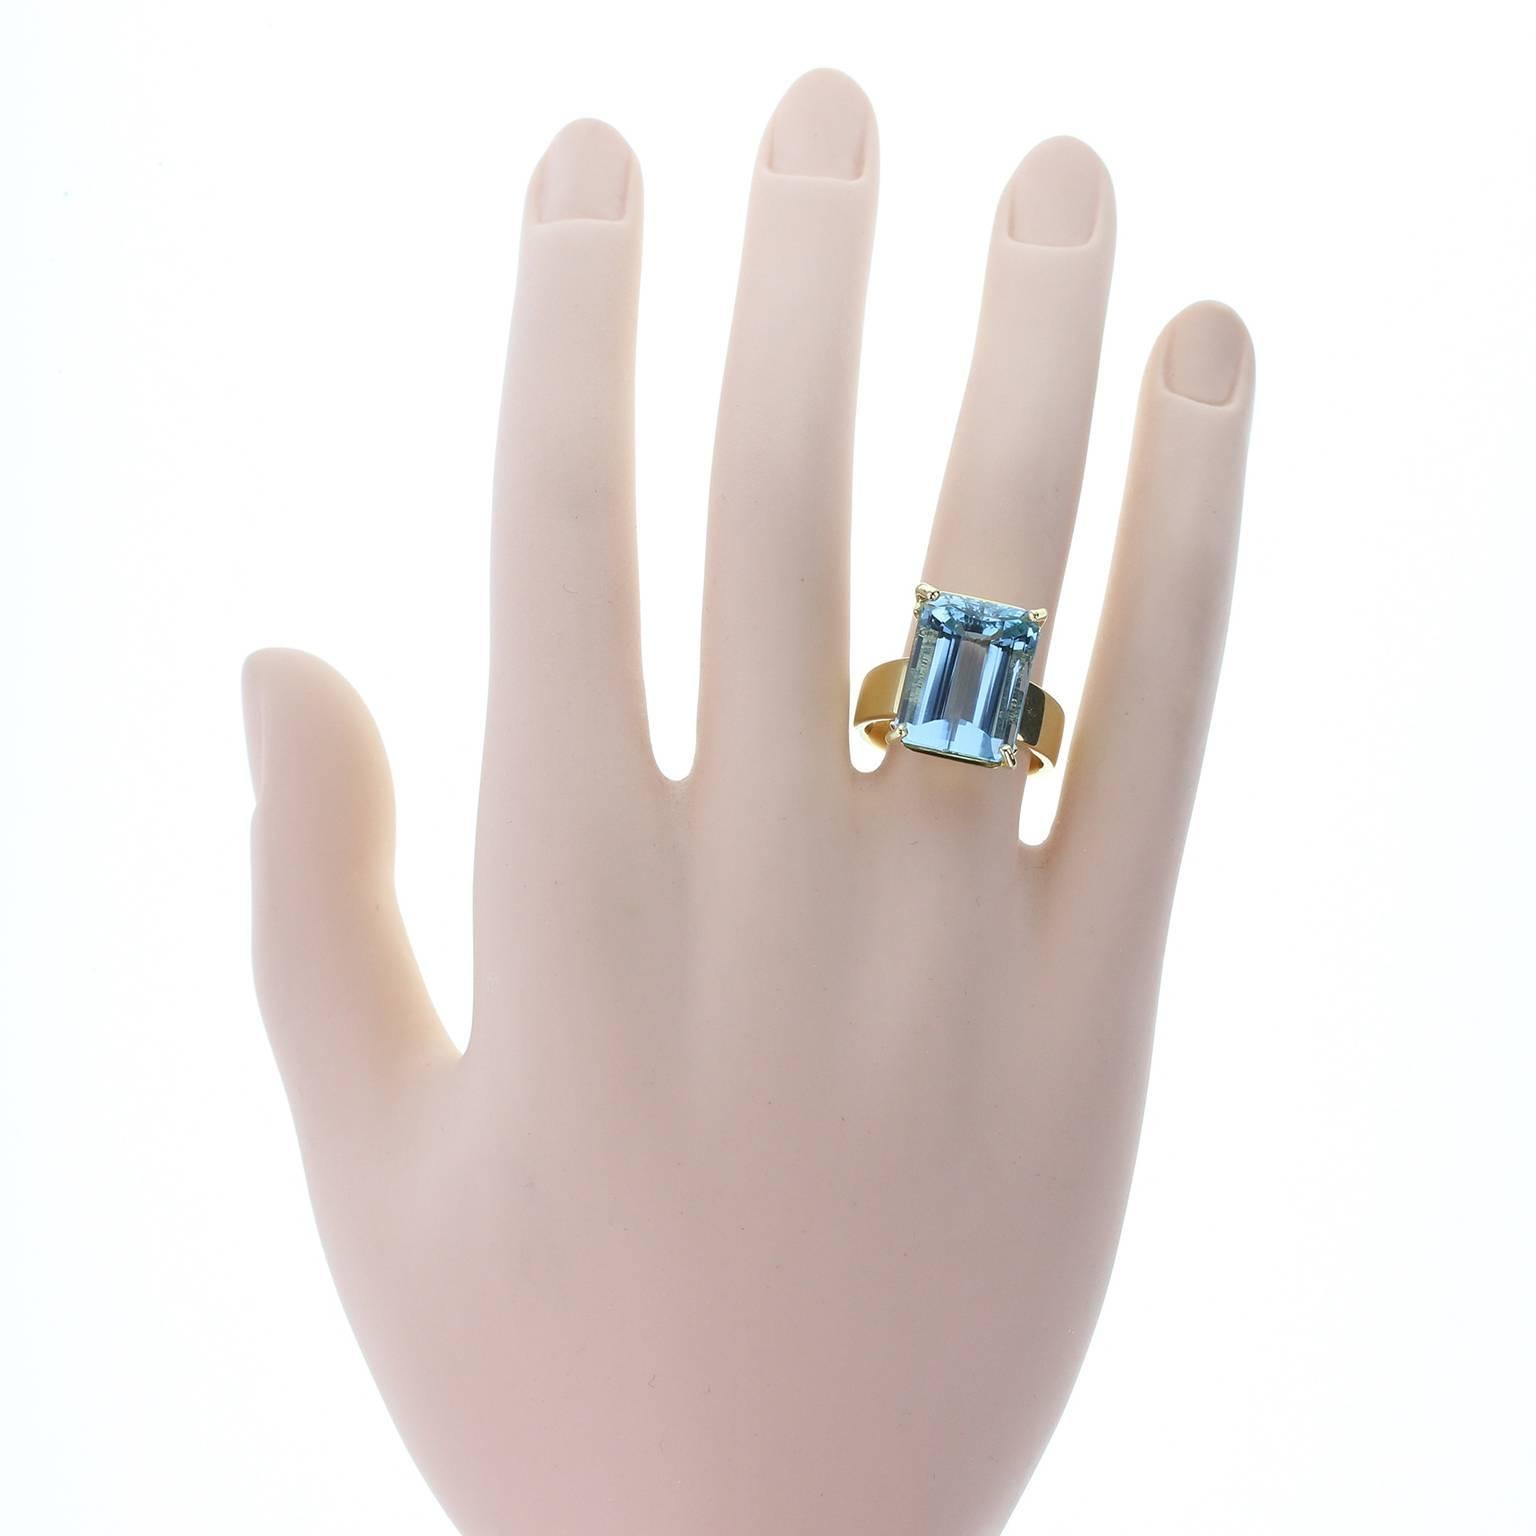 Very Fine Quality Fancy Cut Aquamarine Gold Solitaire Ring 1